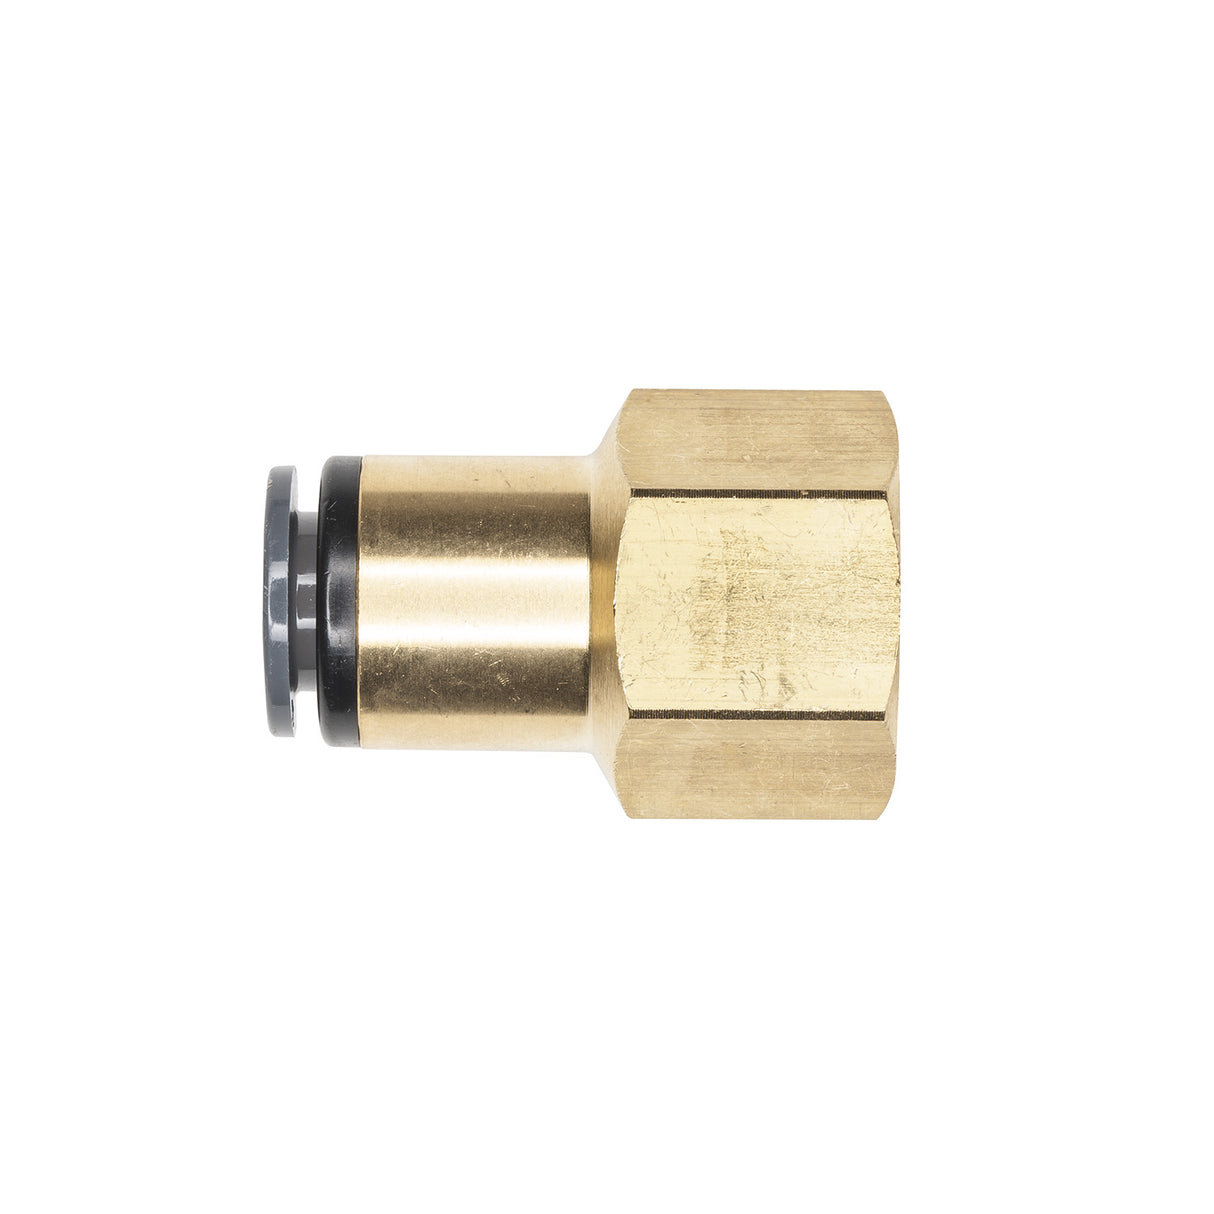 ALKON CORP ­-­ V2F11-34 ­-­ FITTING CONNECTOR FEMALE 3/8T 1/8P DOT PUSH COMP